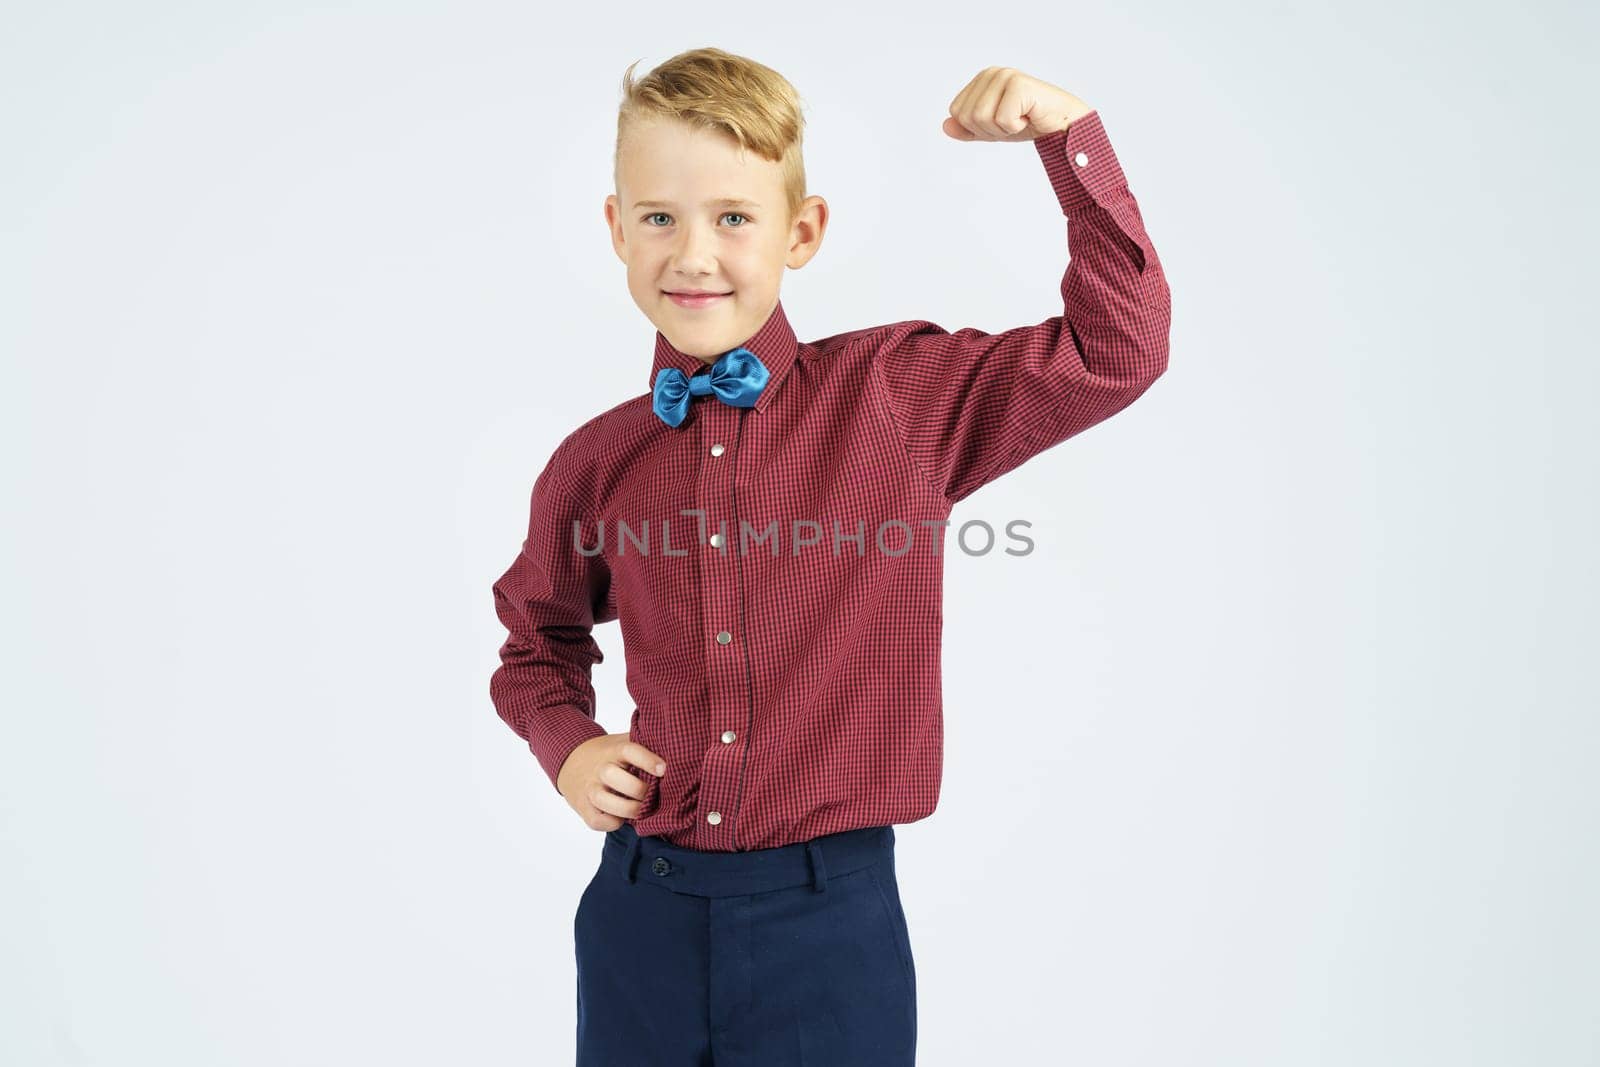 A portrait of a schoolboy who demonstrates his strength. Isolated background. Education concept.